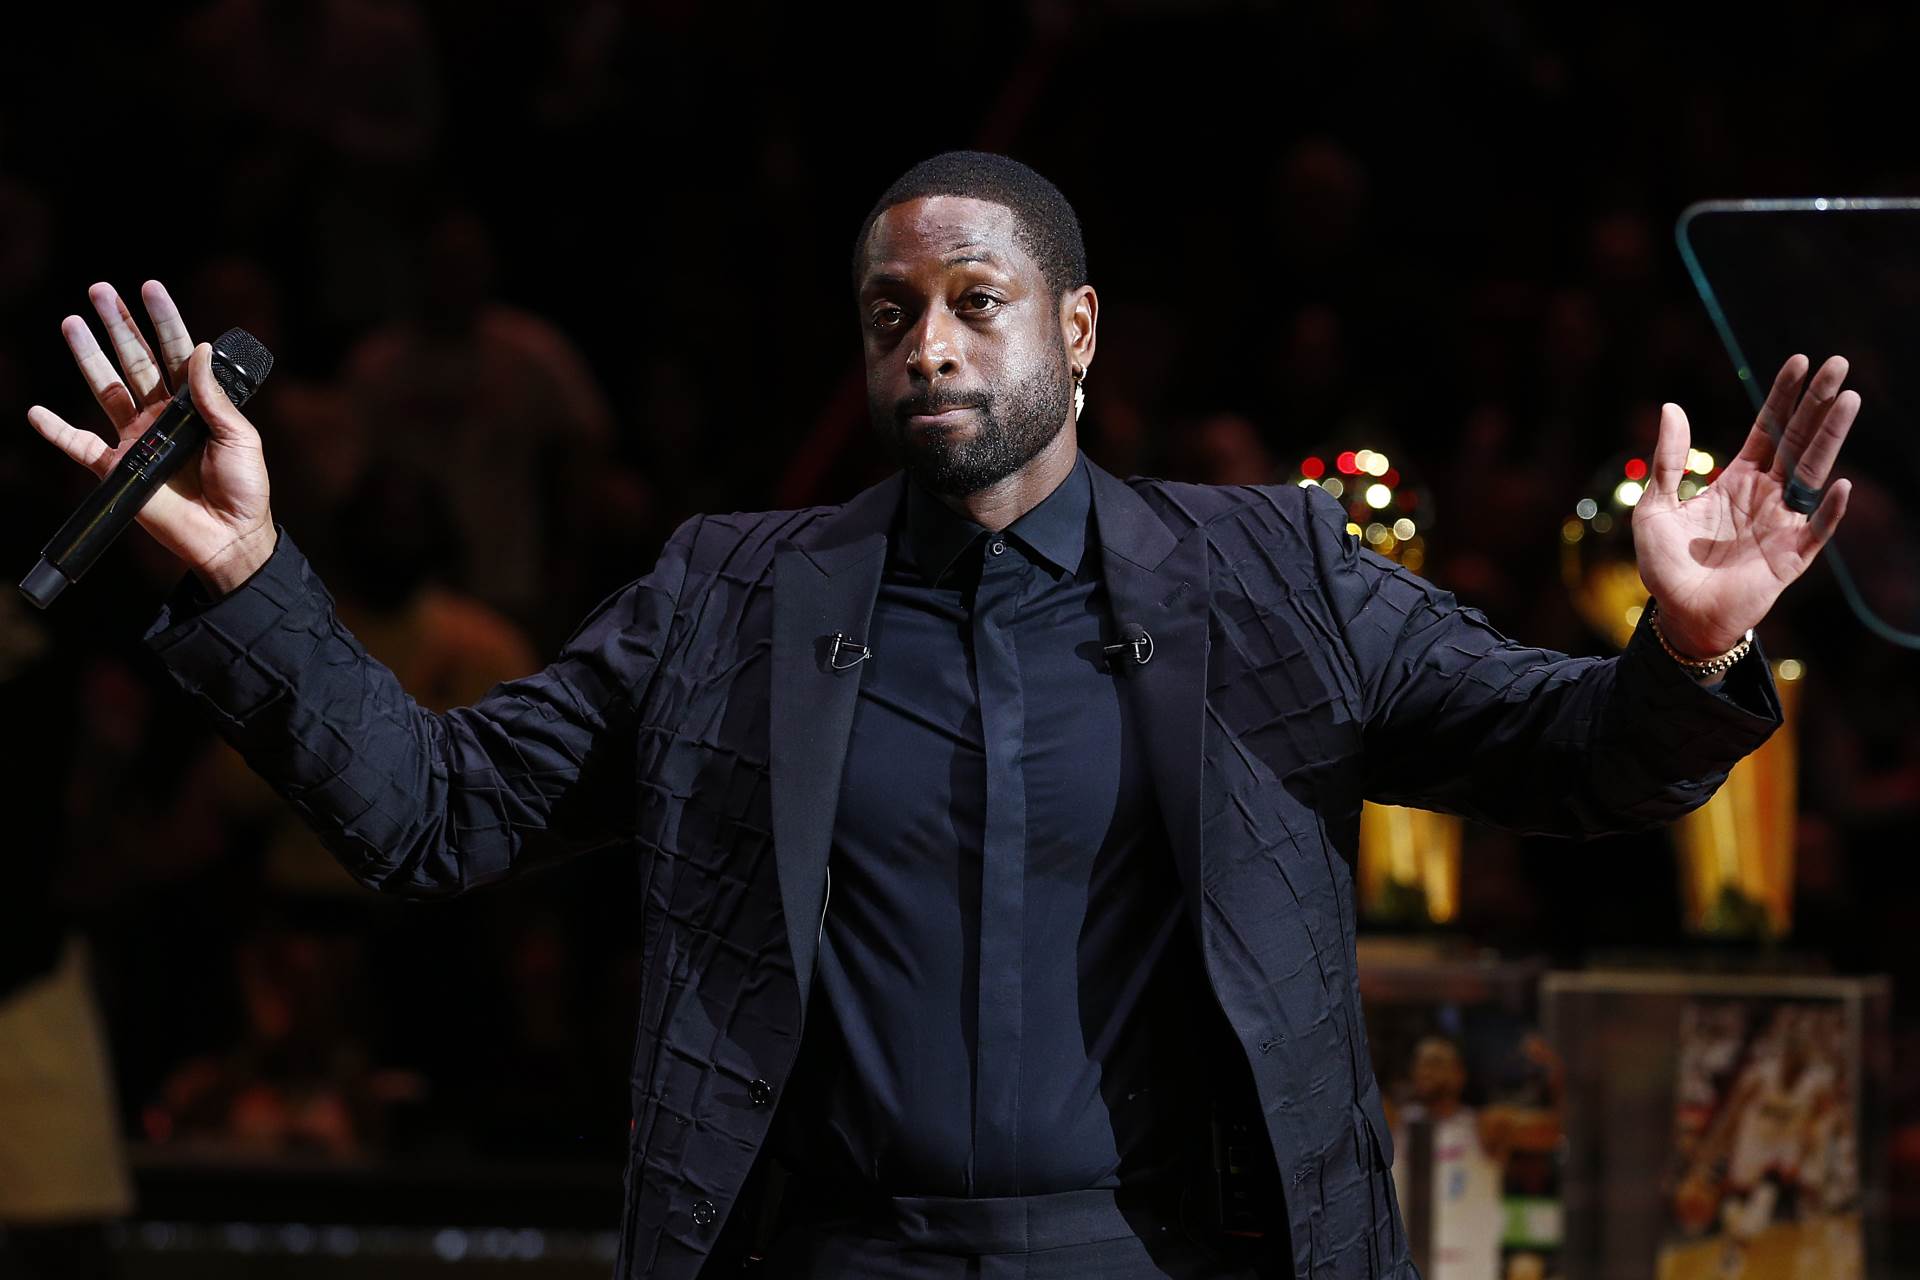 MIAMI, FLORIDA - FEBRUARY 22: Former Miami Heat player Dwyane Wade reacts during his jersey retirement ceremony at American Airlines Arena on February 22, 2020 in Miami, Florida. NOTE TO USER: User expressly acknowledges and agrees that, by downloading and/or using this photograph, user is consenting to the terms and conditions of the Getty Images License Agreement. (Photo by Michael Reaves/Getty Images) 